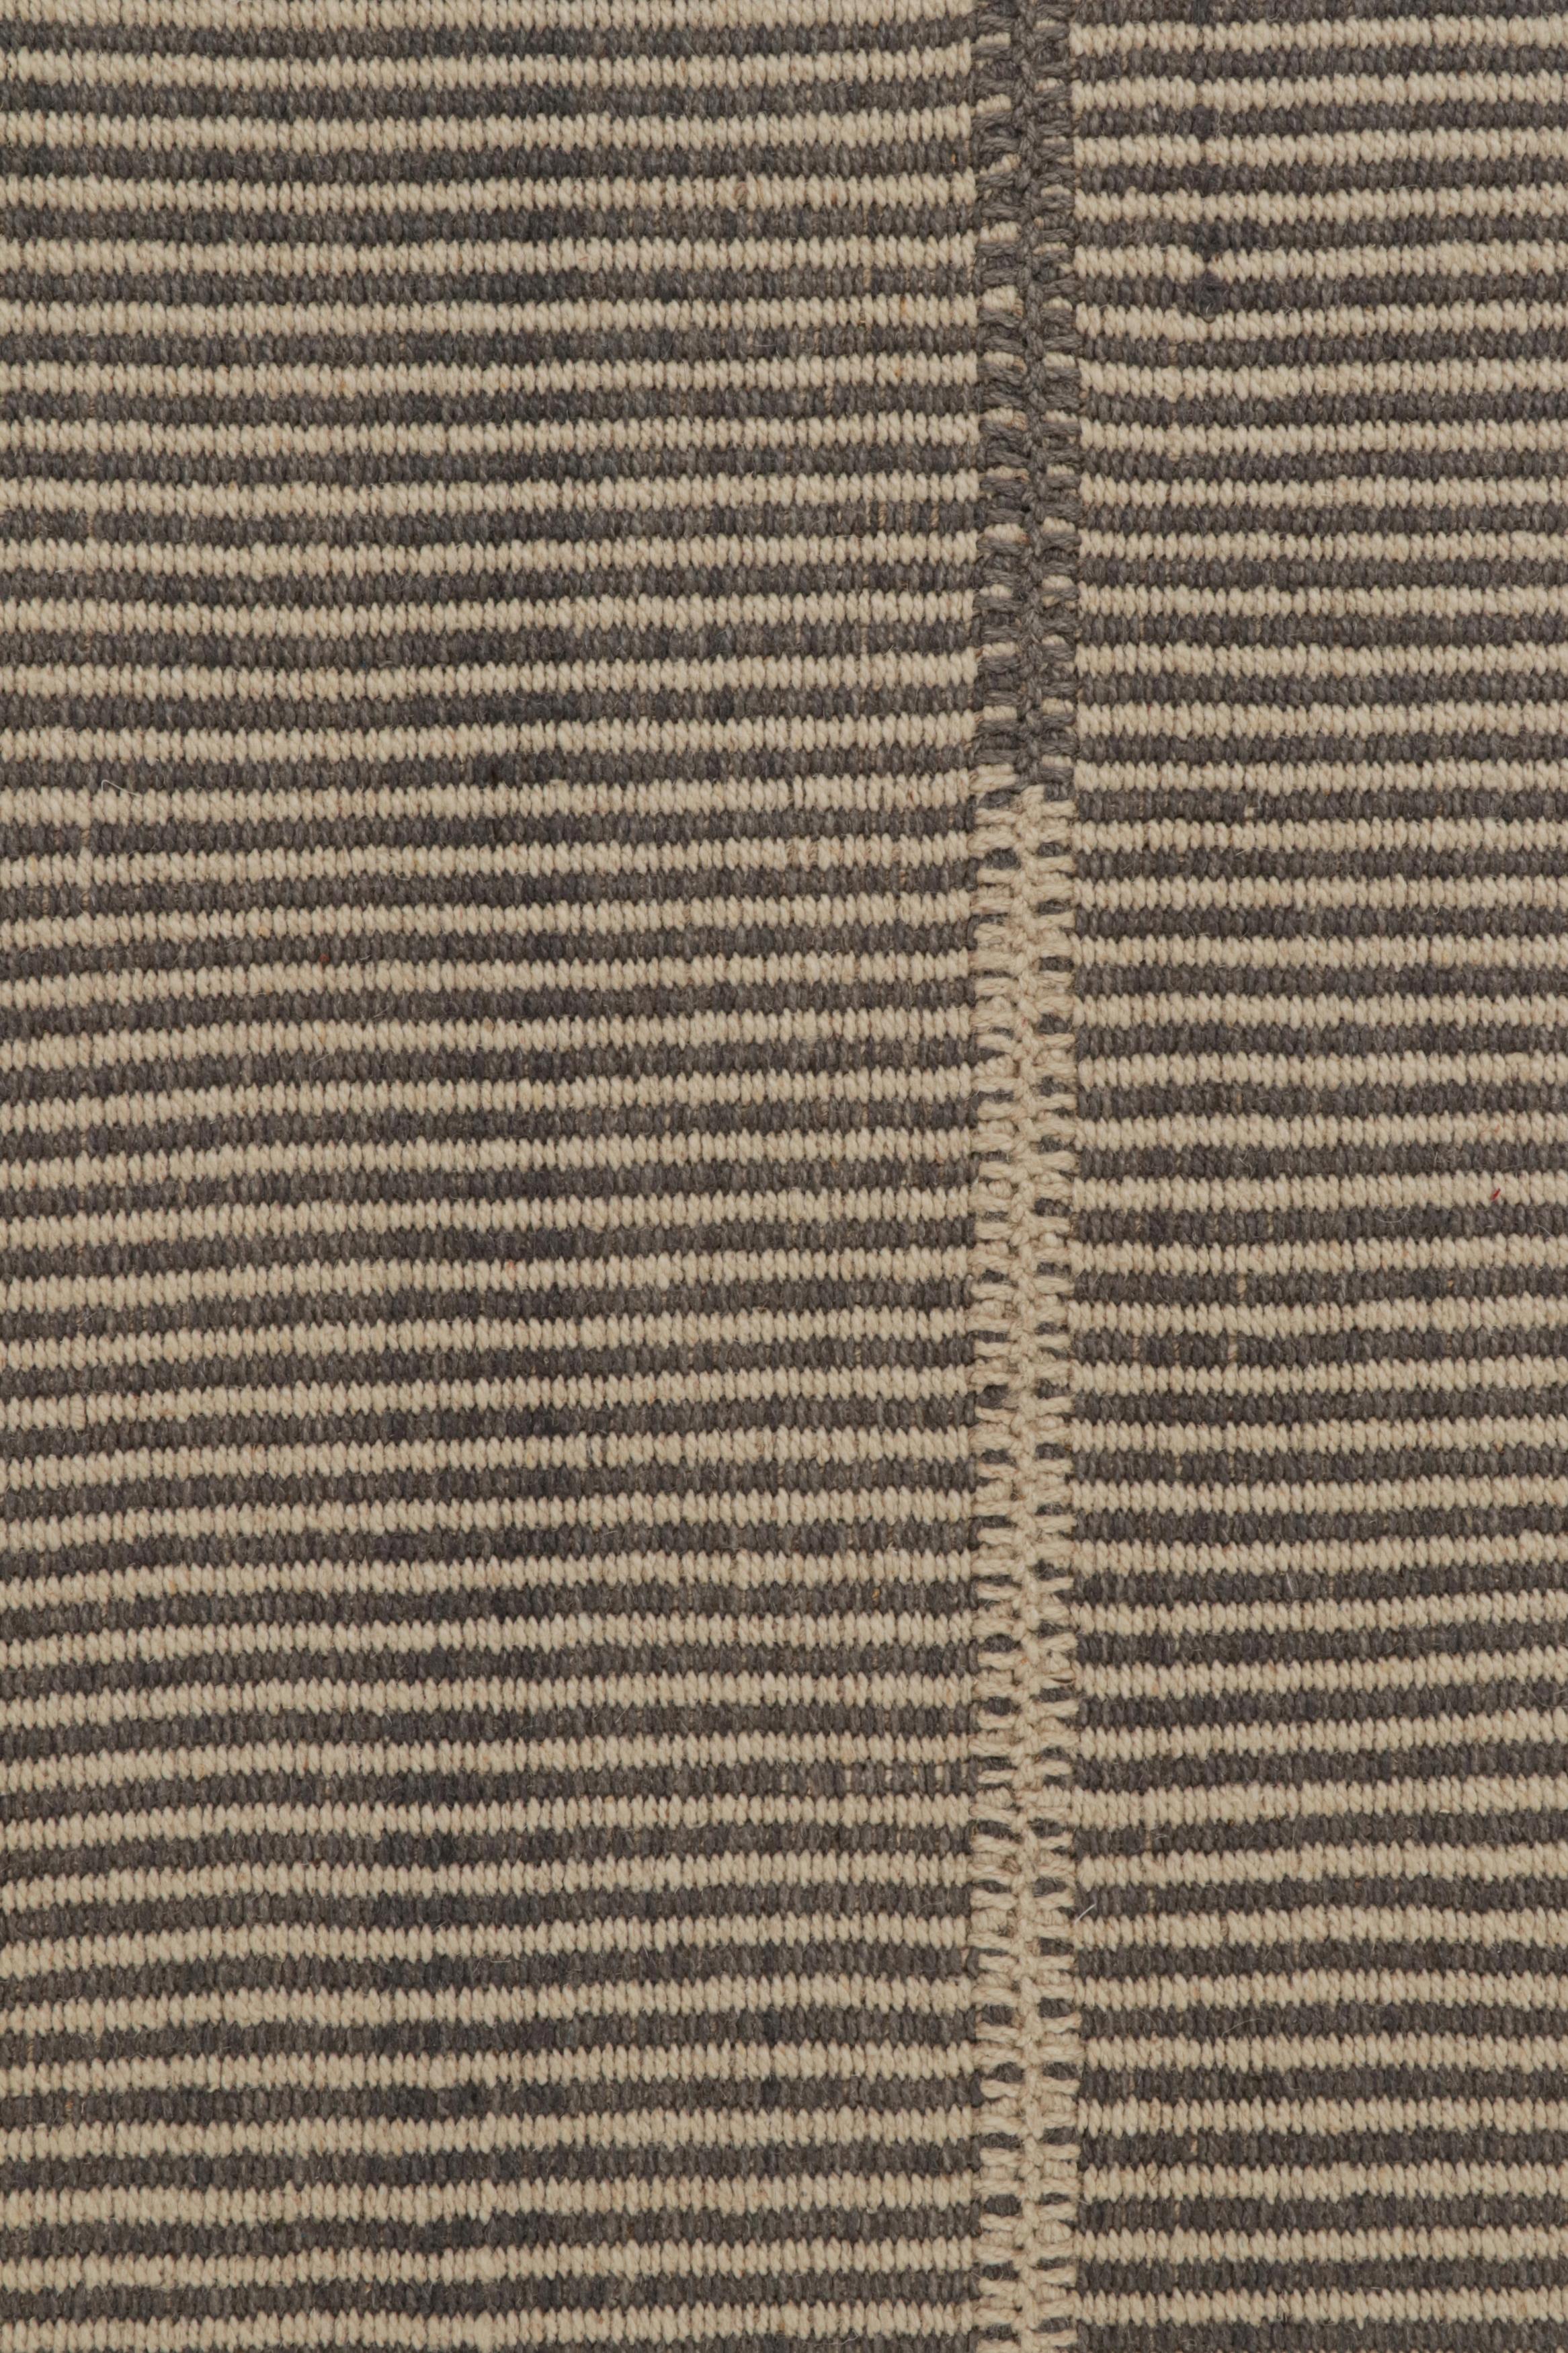 Rug & Kilim’s Contemporary Kilim Extra-Long Runner Rug, in Gray and Beige In New Condition For Sale In Long Island City, NY